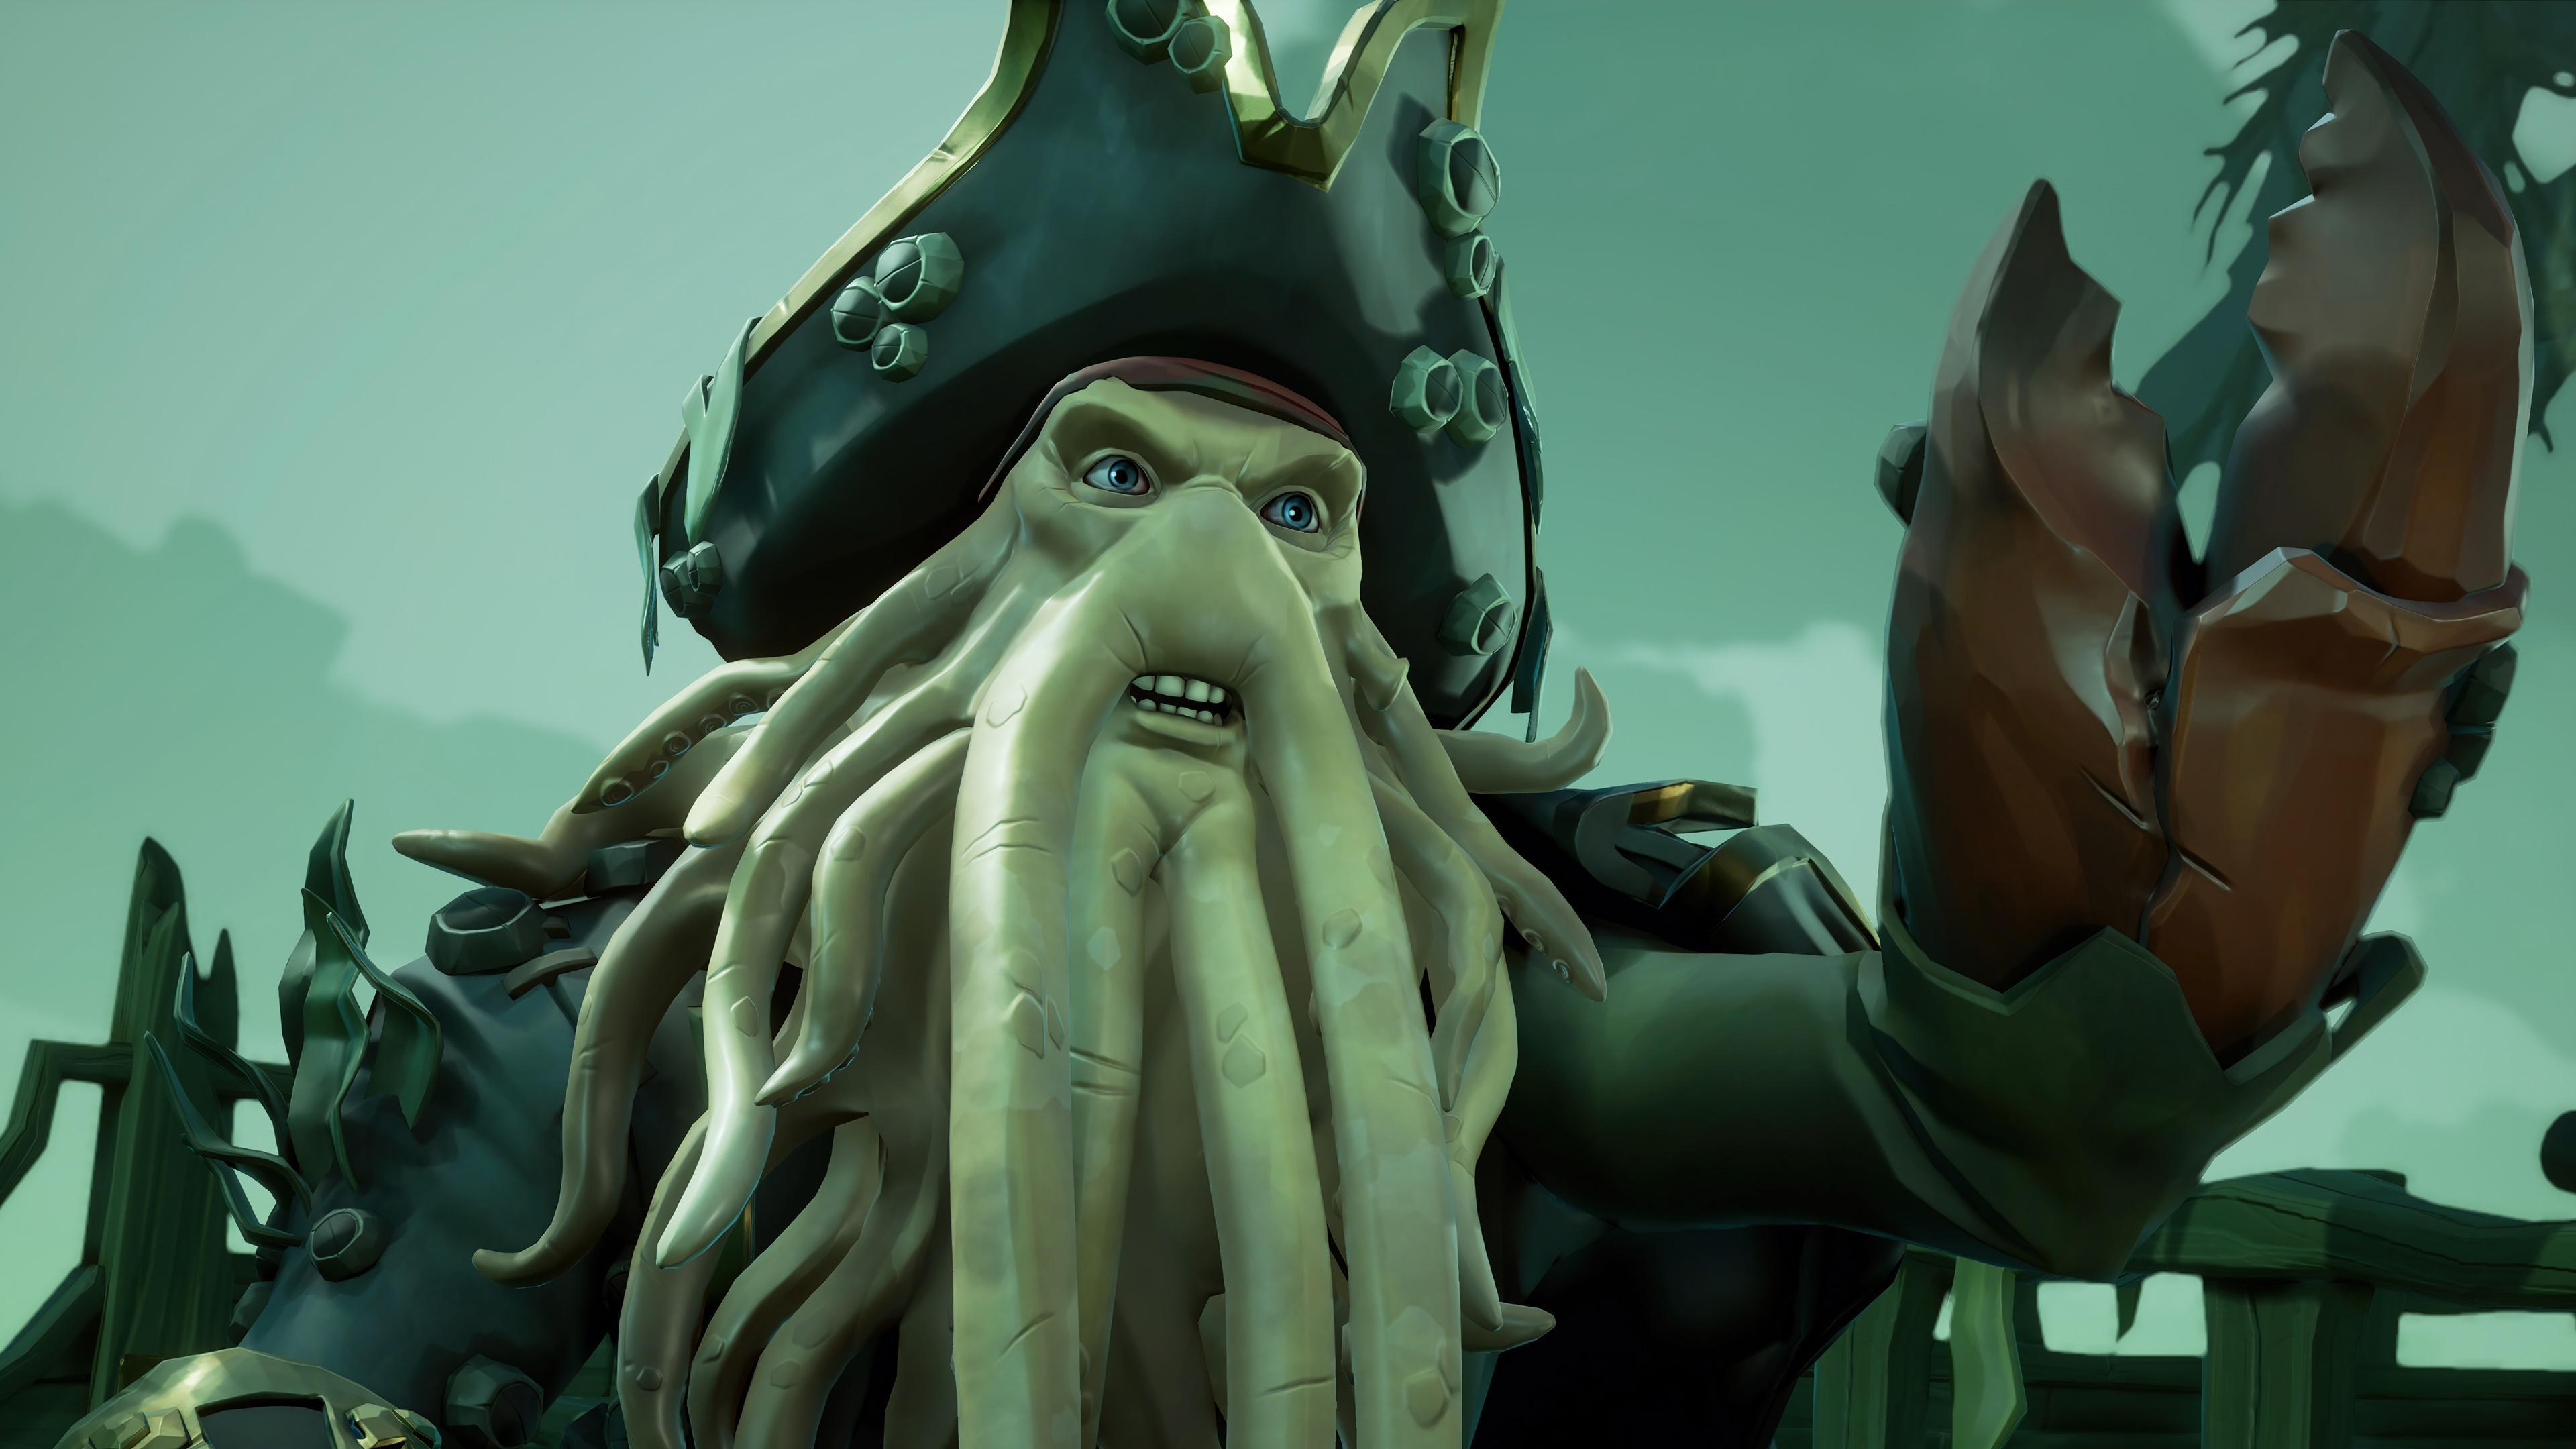 HD wallpaper, Game, Pc, Sea Of Thieves A Pirates Life, Davy Jones, 4K